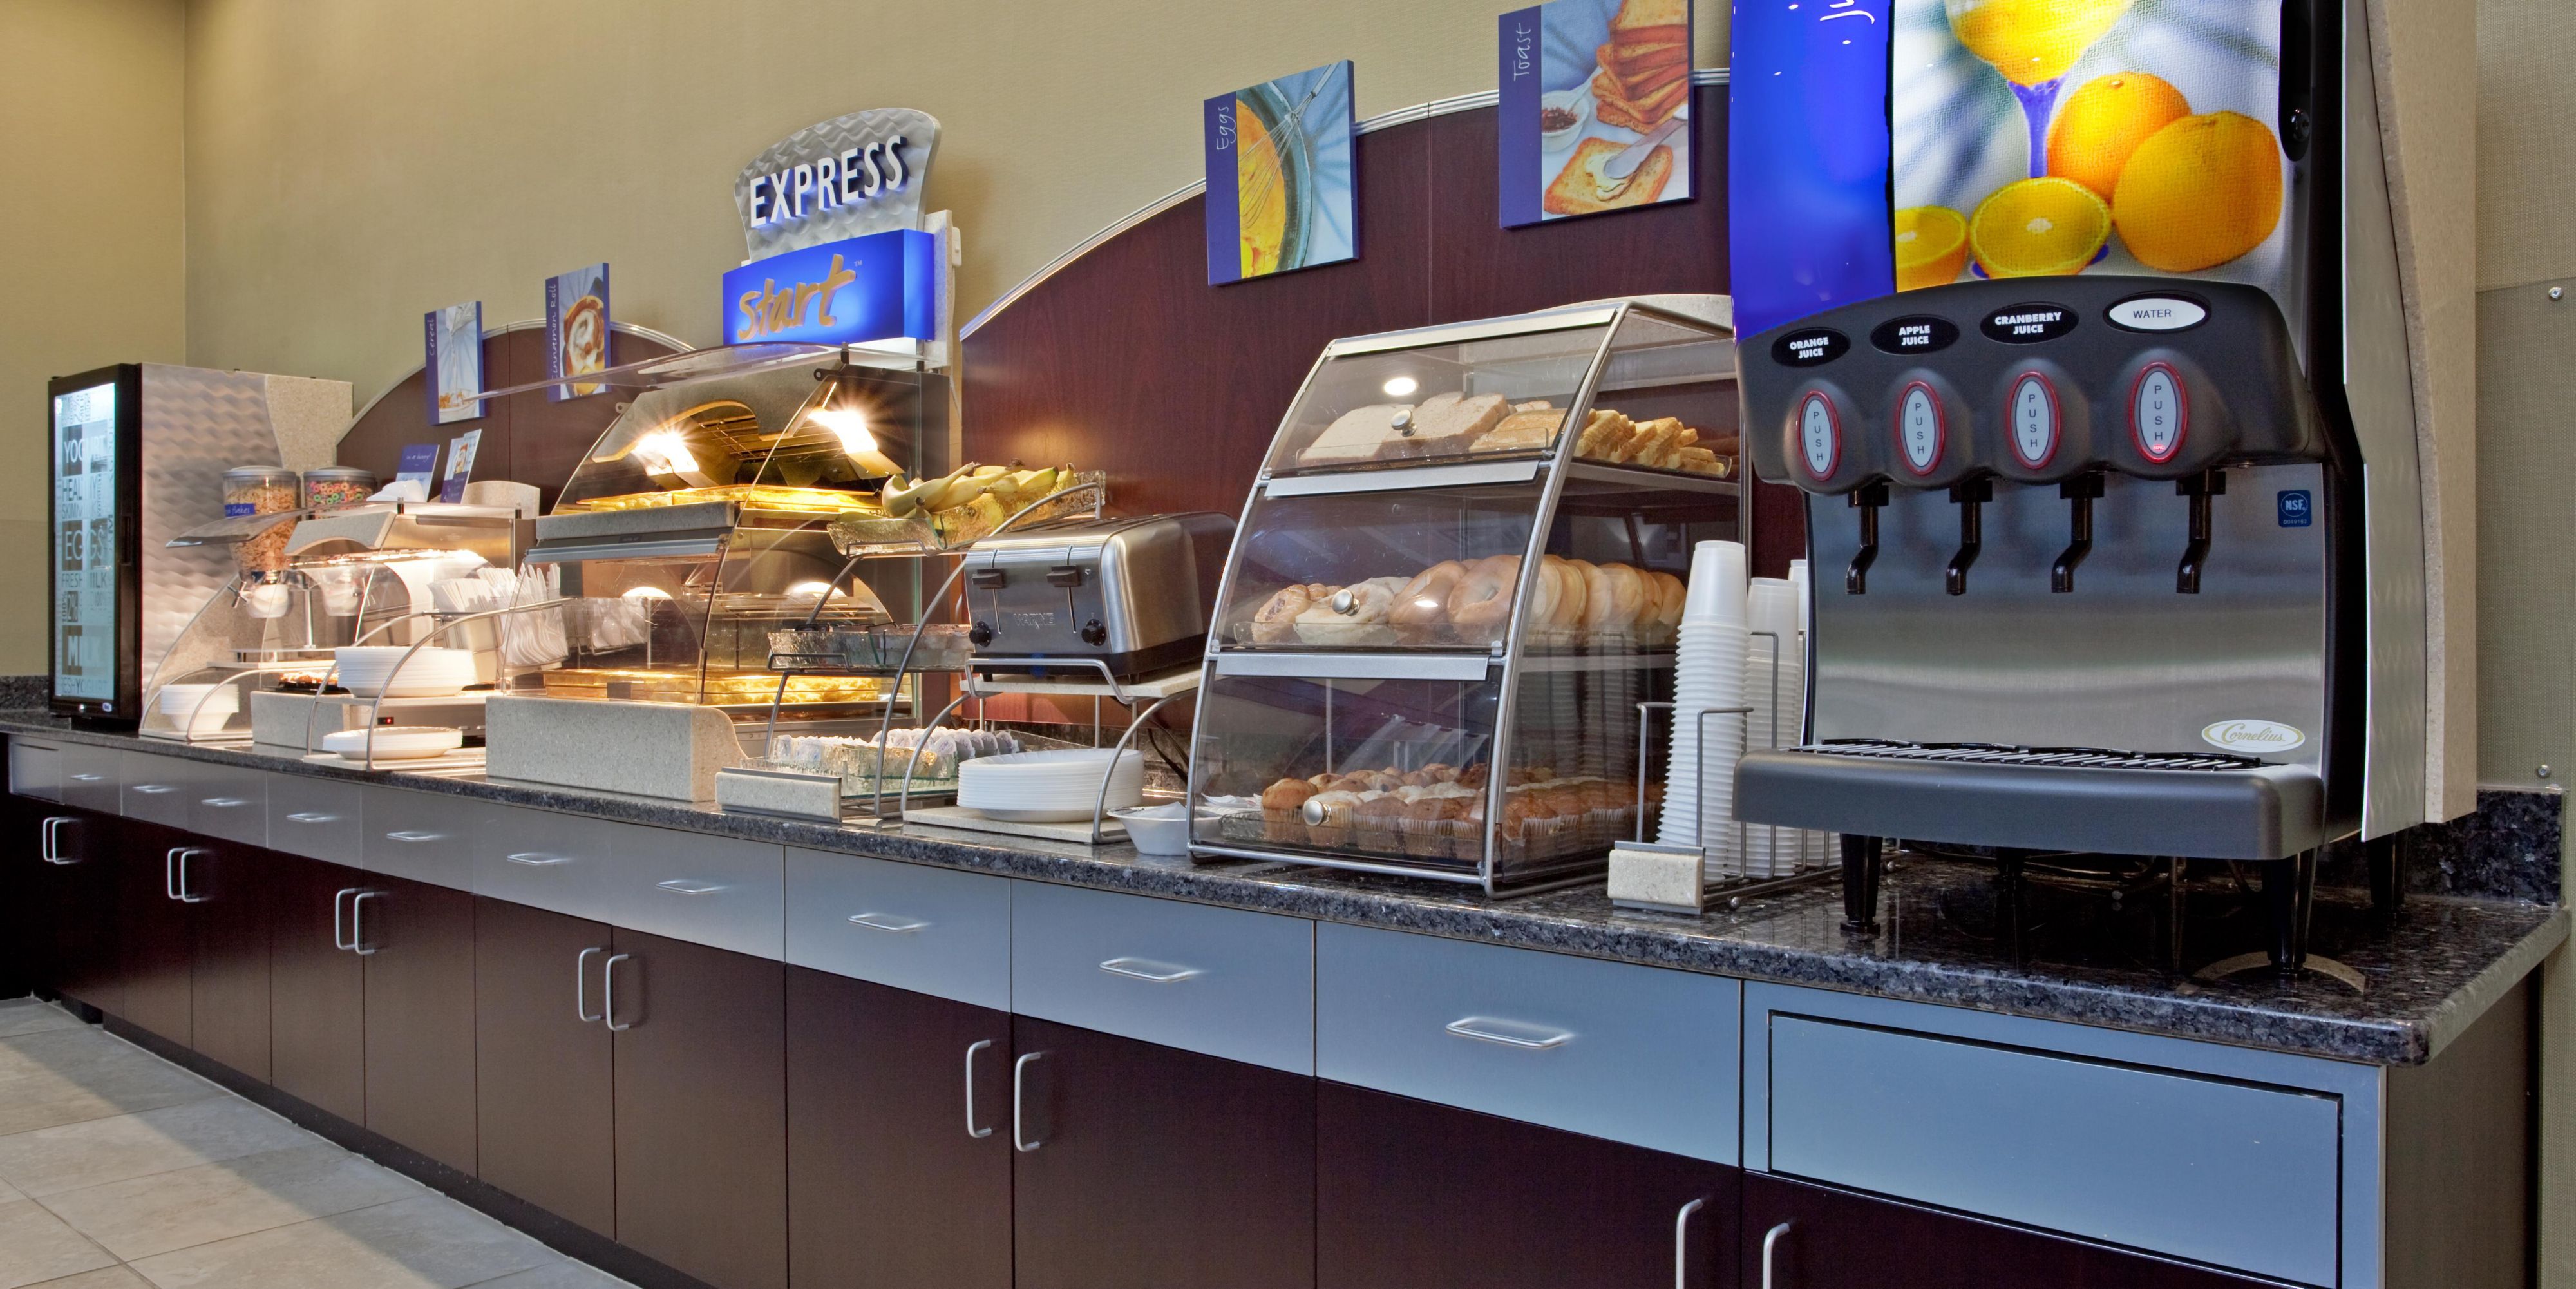 Enjoy complimentary hot breakfast daily in the lobby of the Holiday Inn Express Akron 